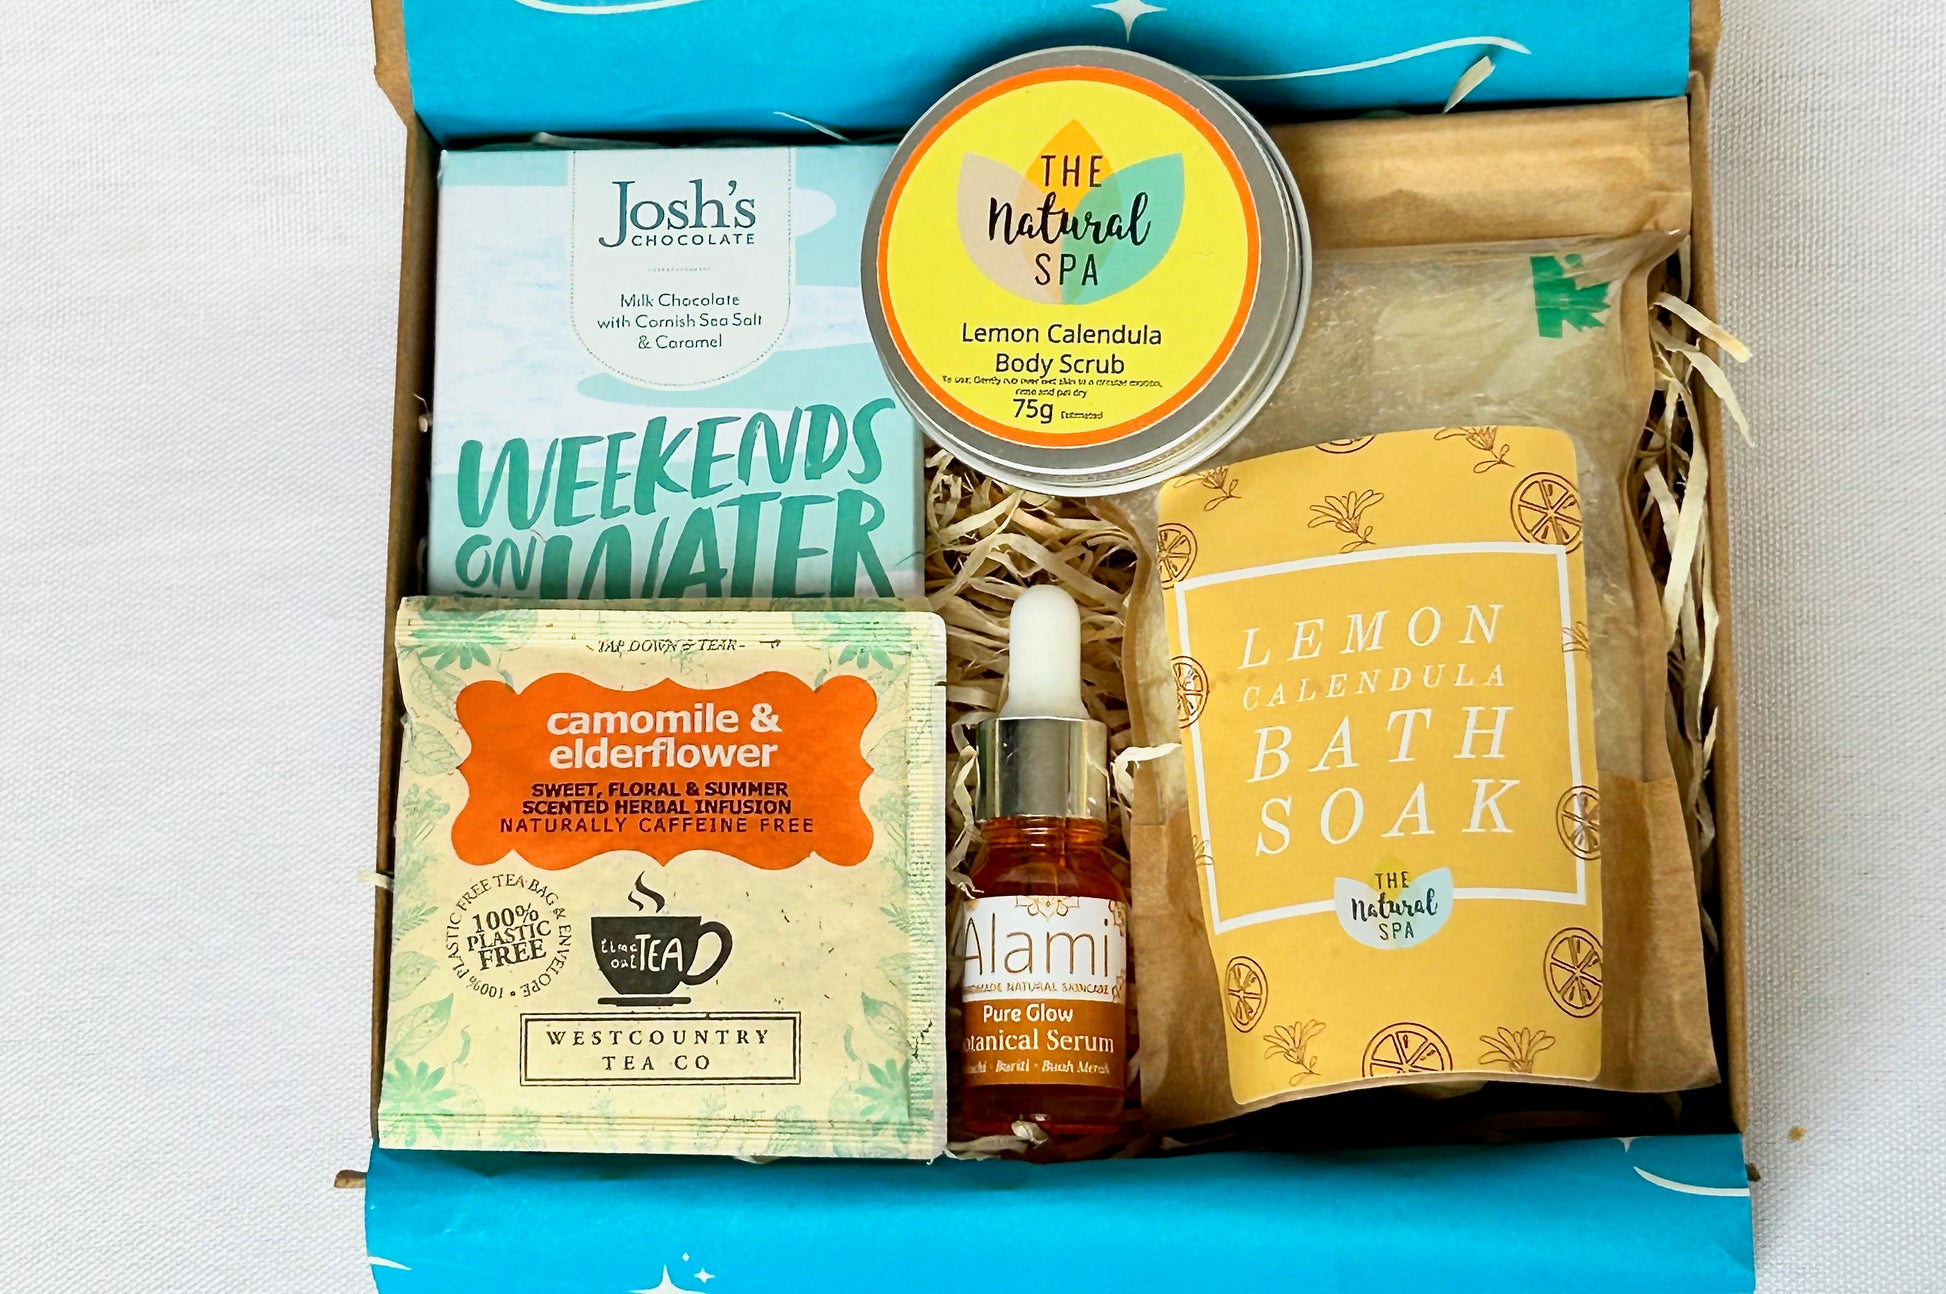 Pamper Hamper Gift Set from Sand & Sparkle with all natural skincare products including bath soak, body scrub, luxurious facial oil, artisan chocolate and herbal tea from Devon and Cornish artisans